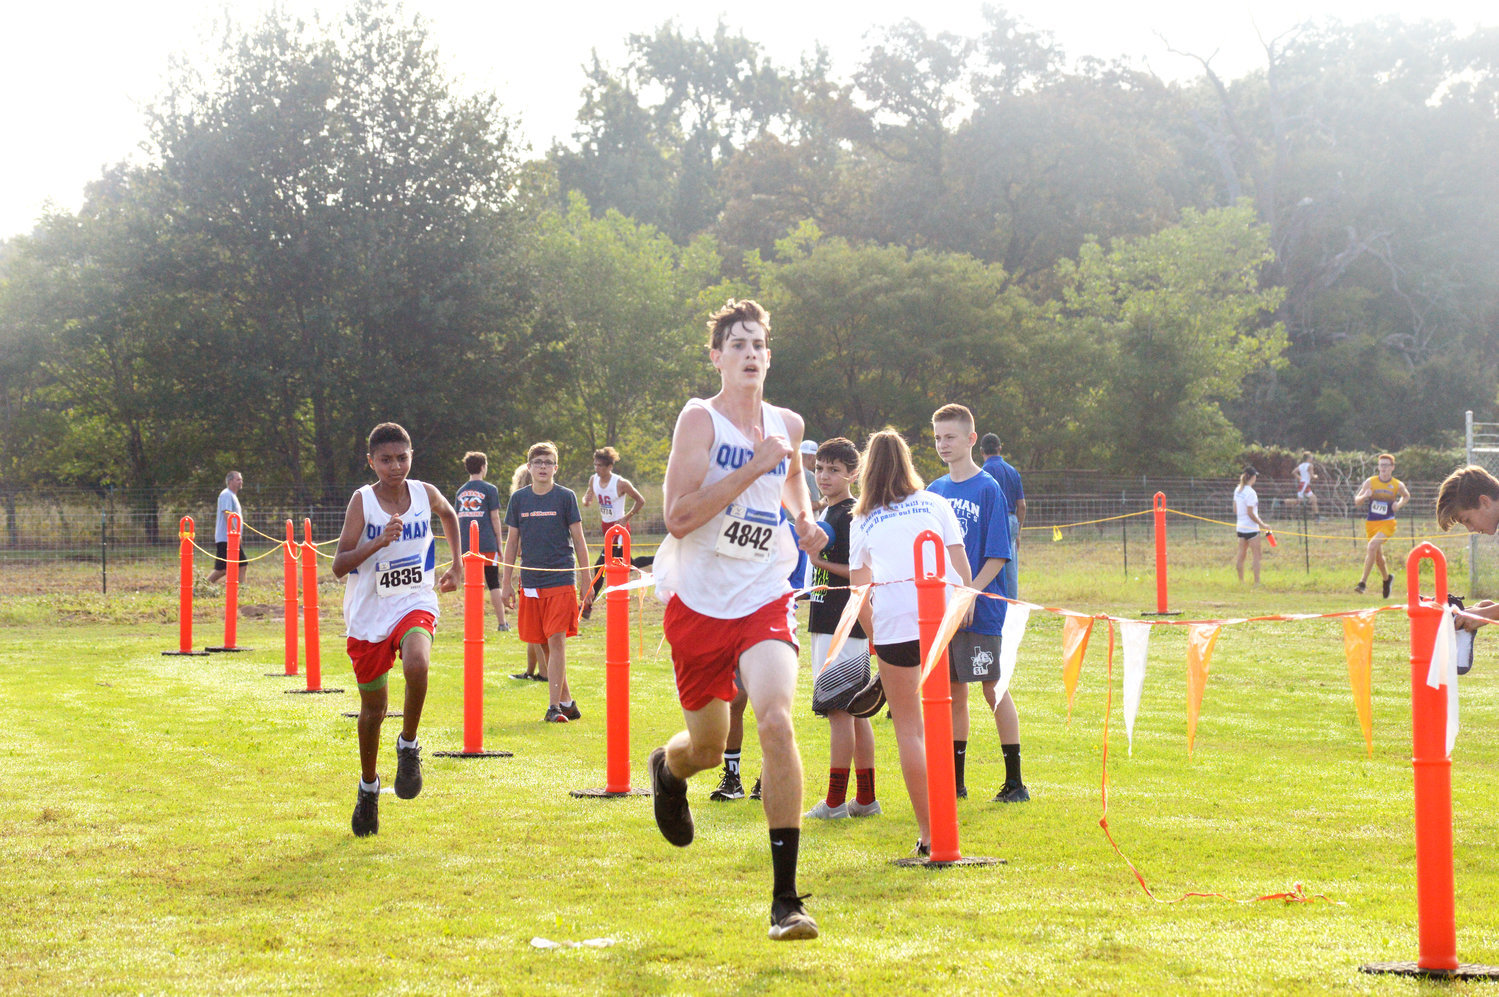 Quitman’s Riley Flanagan finishes strong at the district cross country meet Saturday.